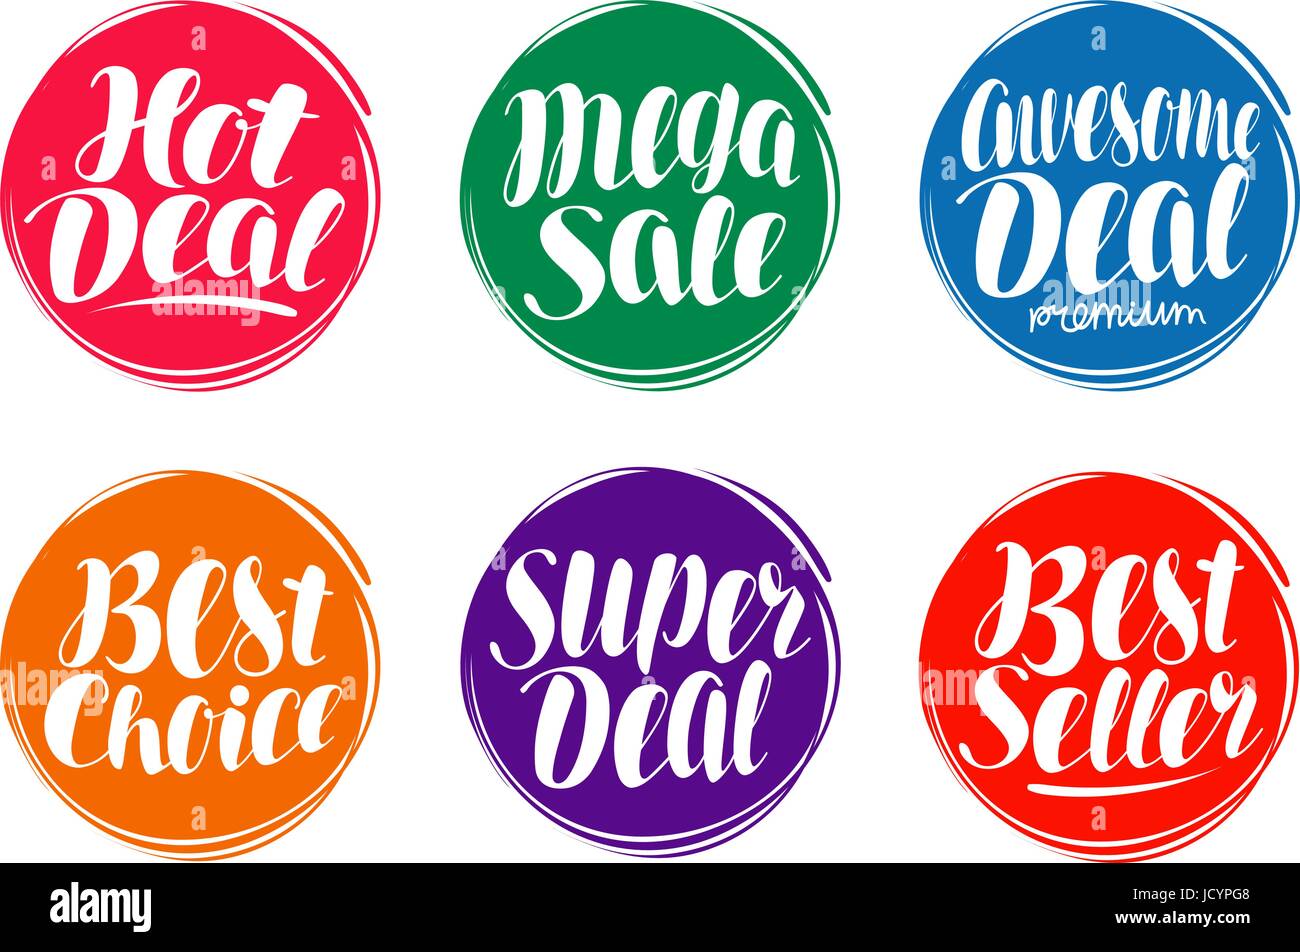 Sale label set. Hot deal, best choice, seller icon or symbol. Handwritten lettering, calligraphy vector illustration Stock Vector